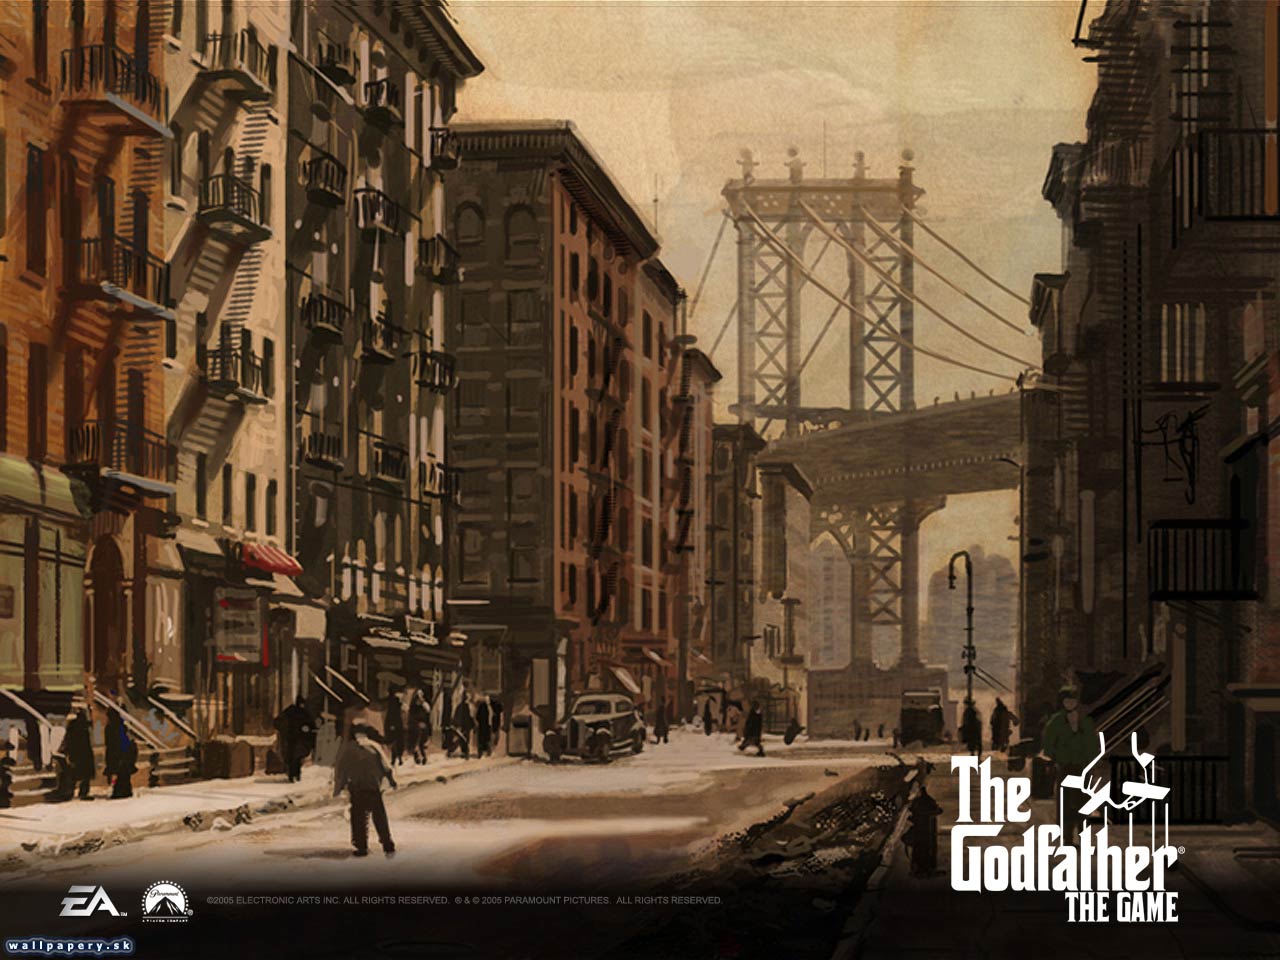 The Godfather - wallpaper 16